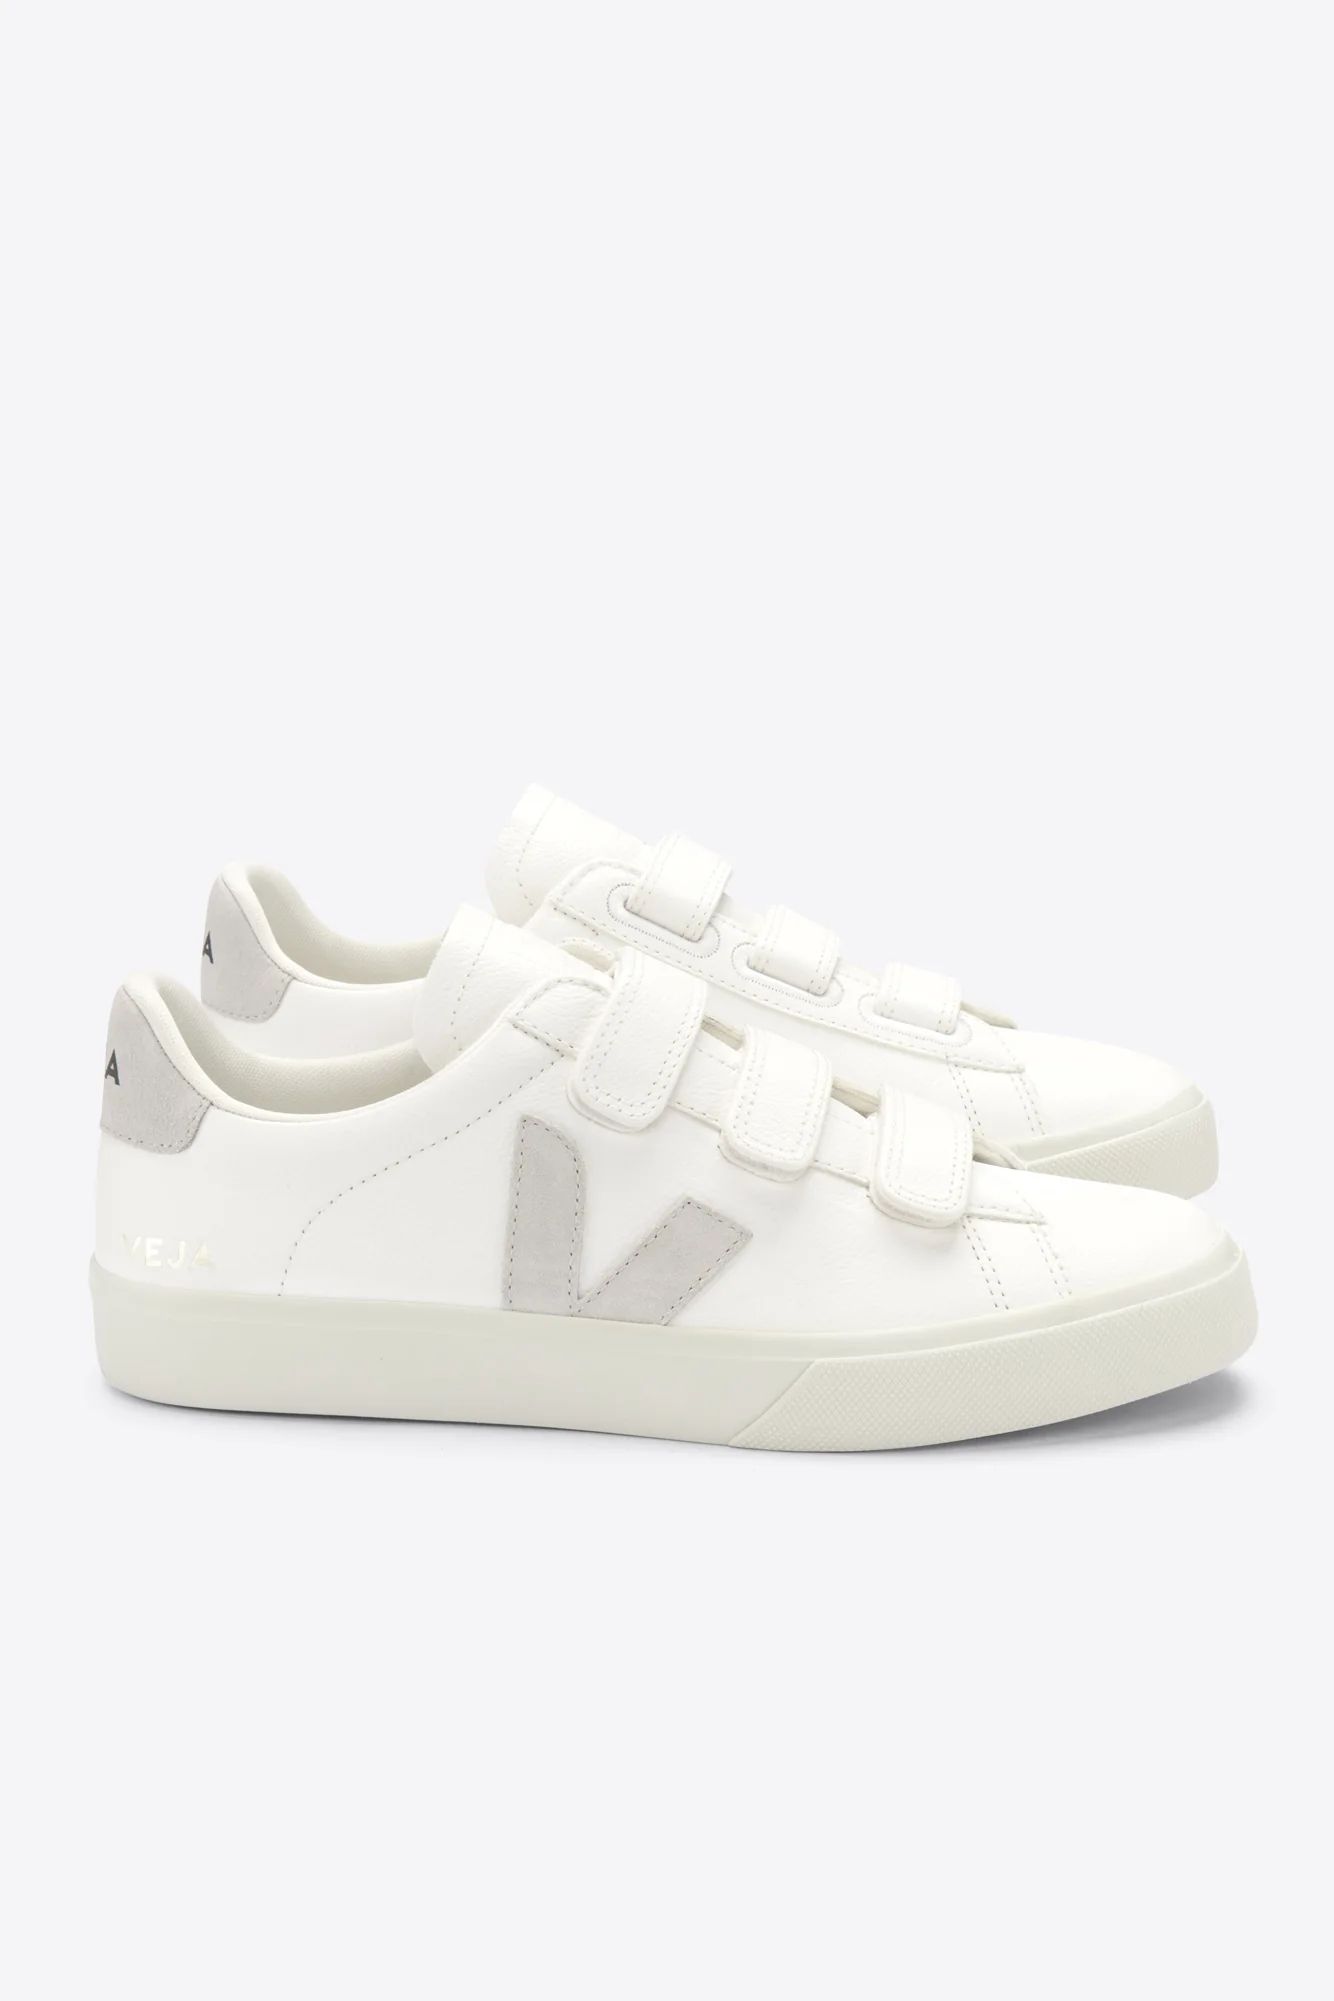 Veja Recife Sneaker - Extra White Natural | Amour Vert